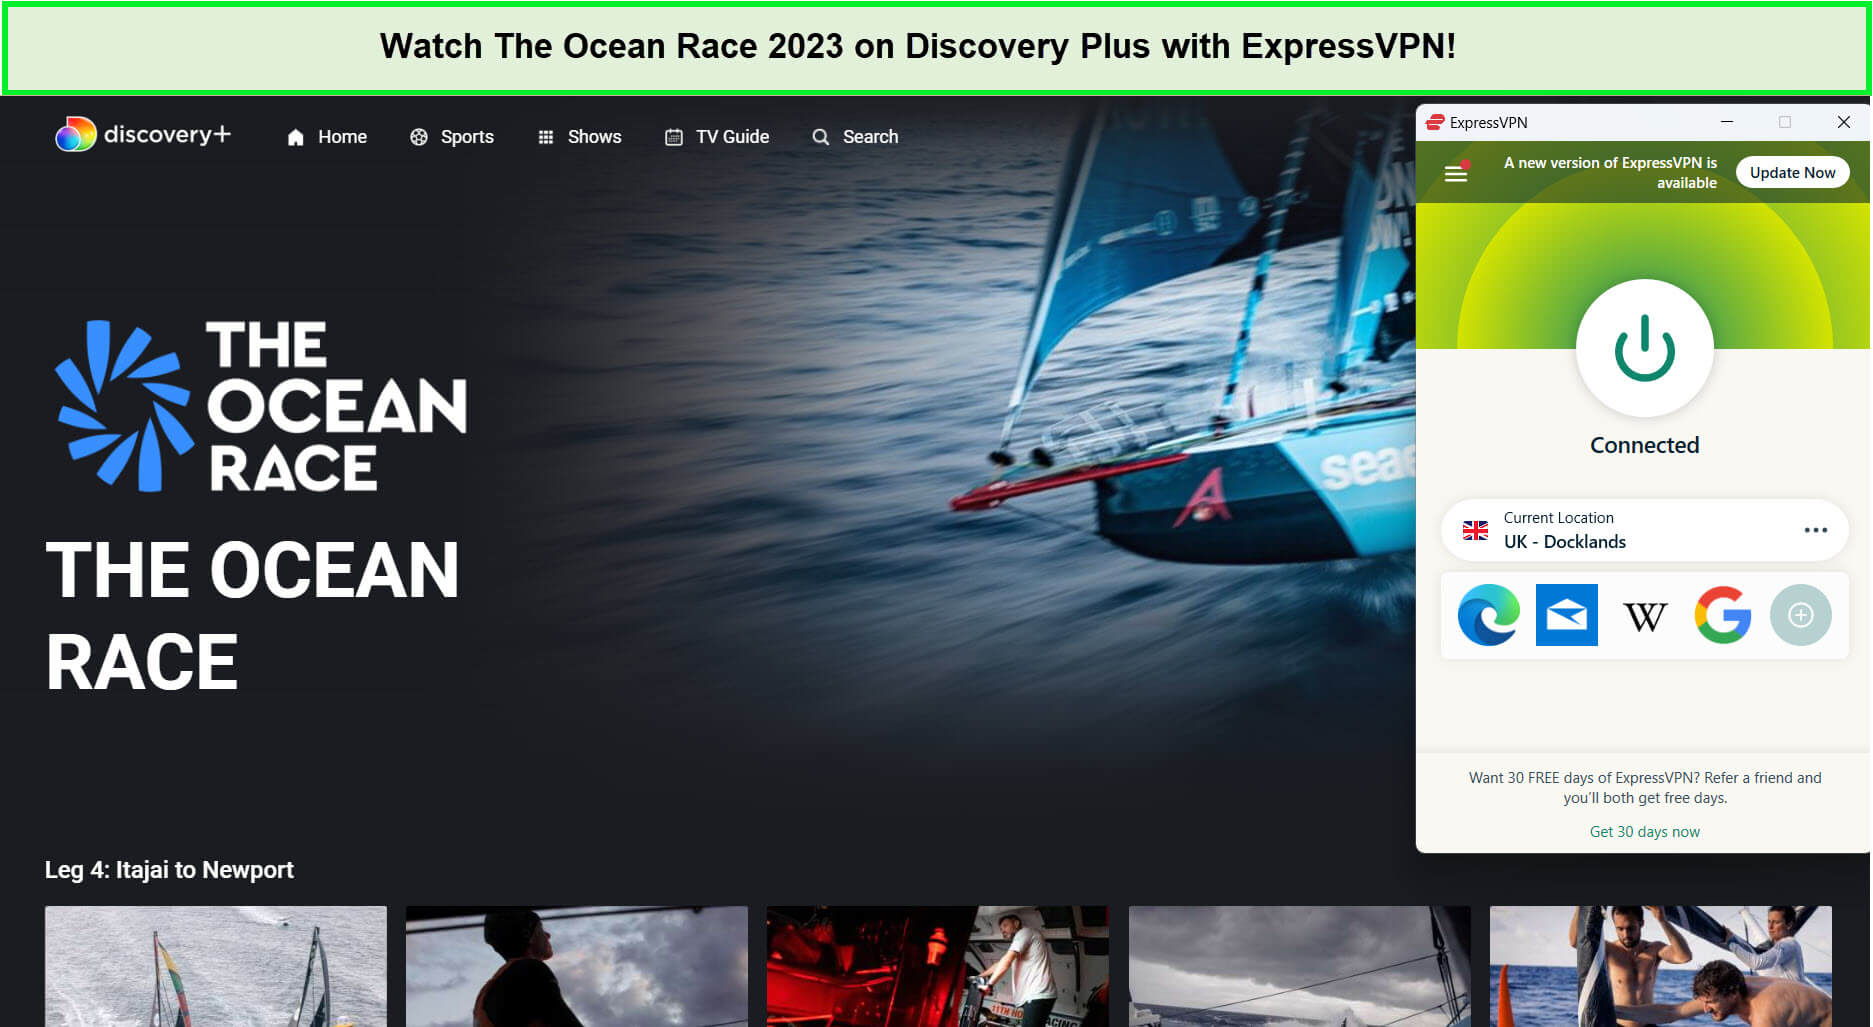 expressvpn-unblocks-the-ocean-race-2023-live-in-Singapore-on-discovery-plus